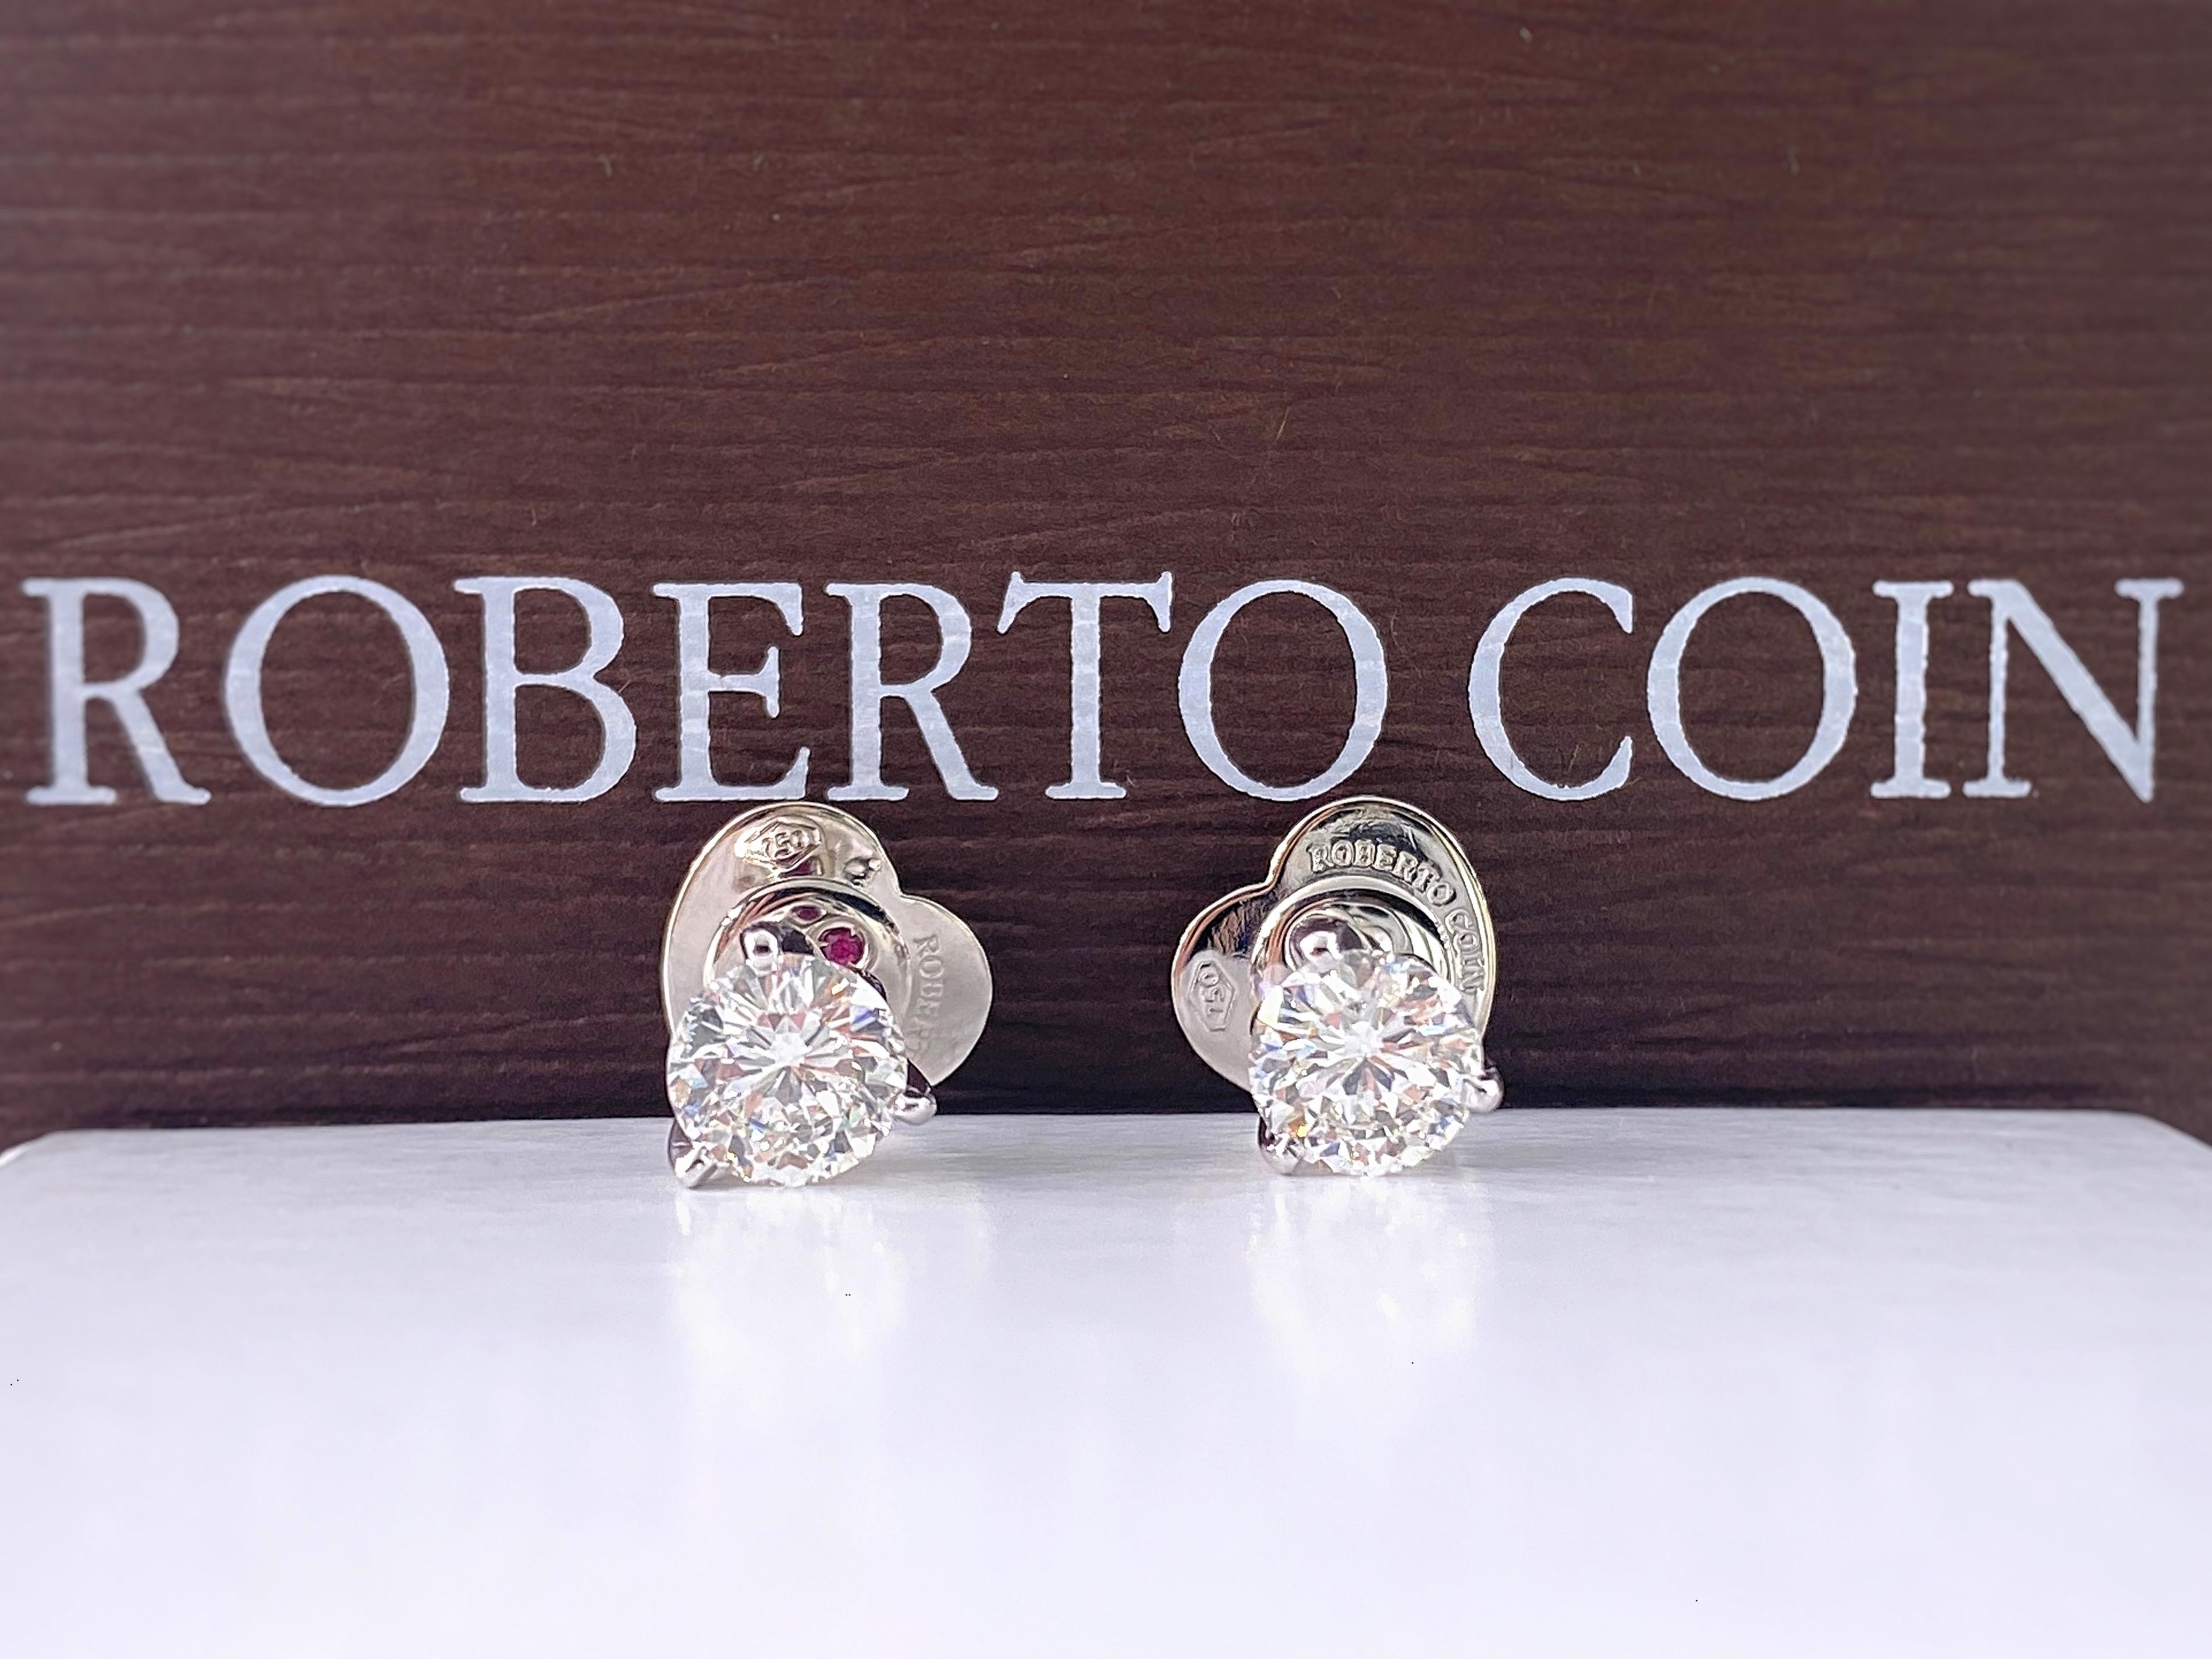 Roberto Coin Cento Diamond Stud Earrings
Style:  Studs with Tulip Setting
Ref. number:  #004987/#007326
Metal:   18kt White Gold
Backs:  Roberto Coin Heart Shape Push Back for Pierced Ears
TCW:  2.08 tcw
Diamond #1:  #007326 1.03 cts I, VS2 
Diamond